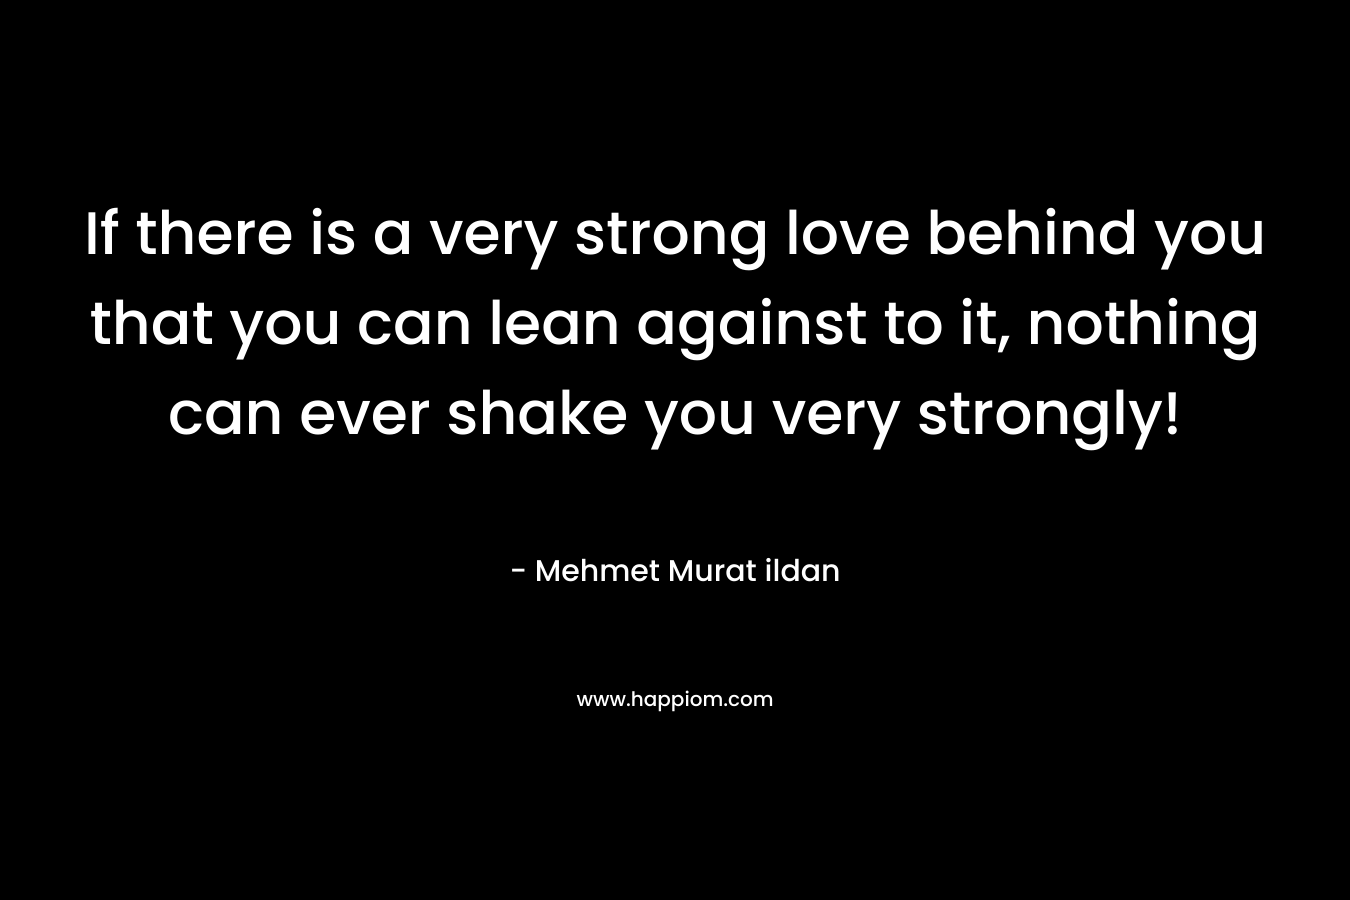 If there is a very strong love behind you that you can lean against to it, nothing can ever shake you very strongly! – Mehmet Murat ildan